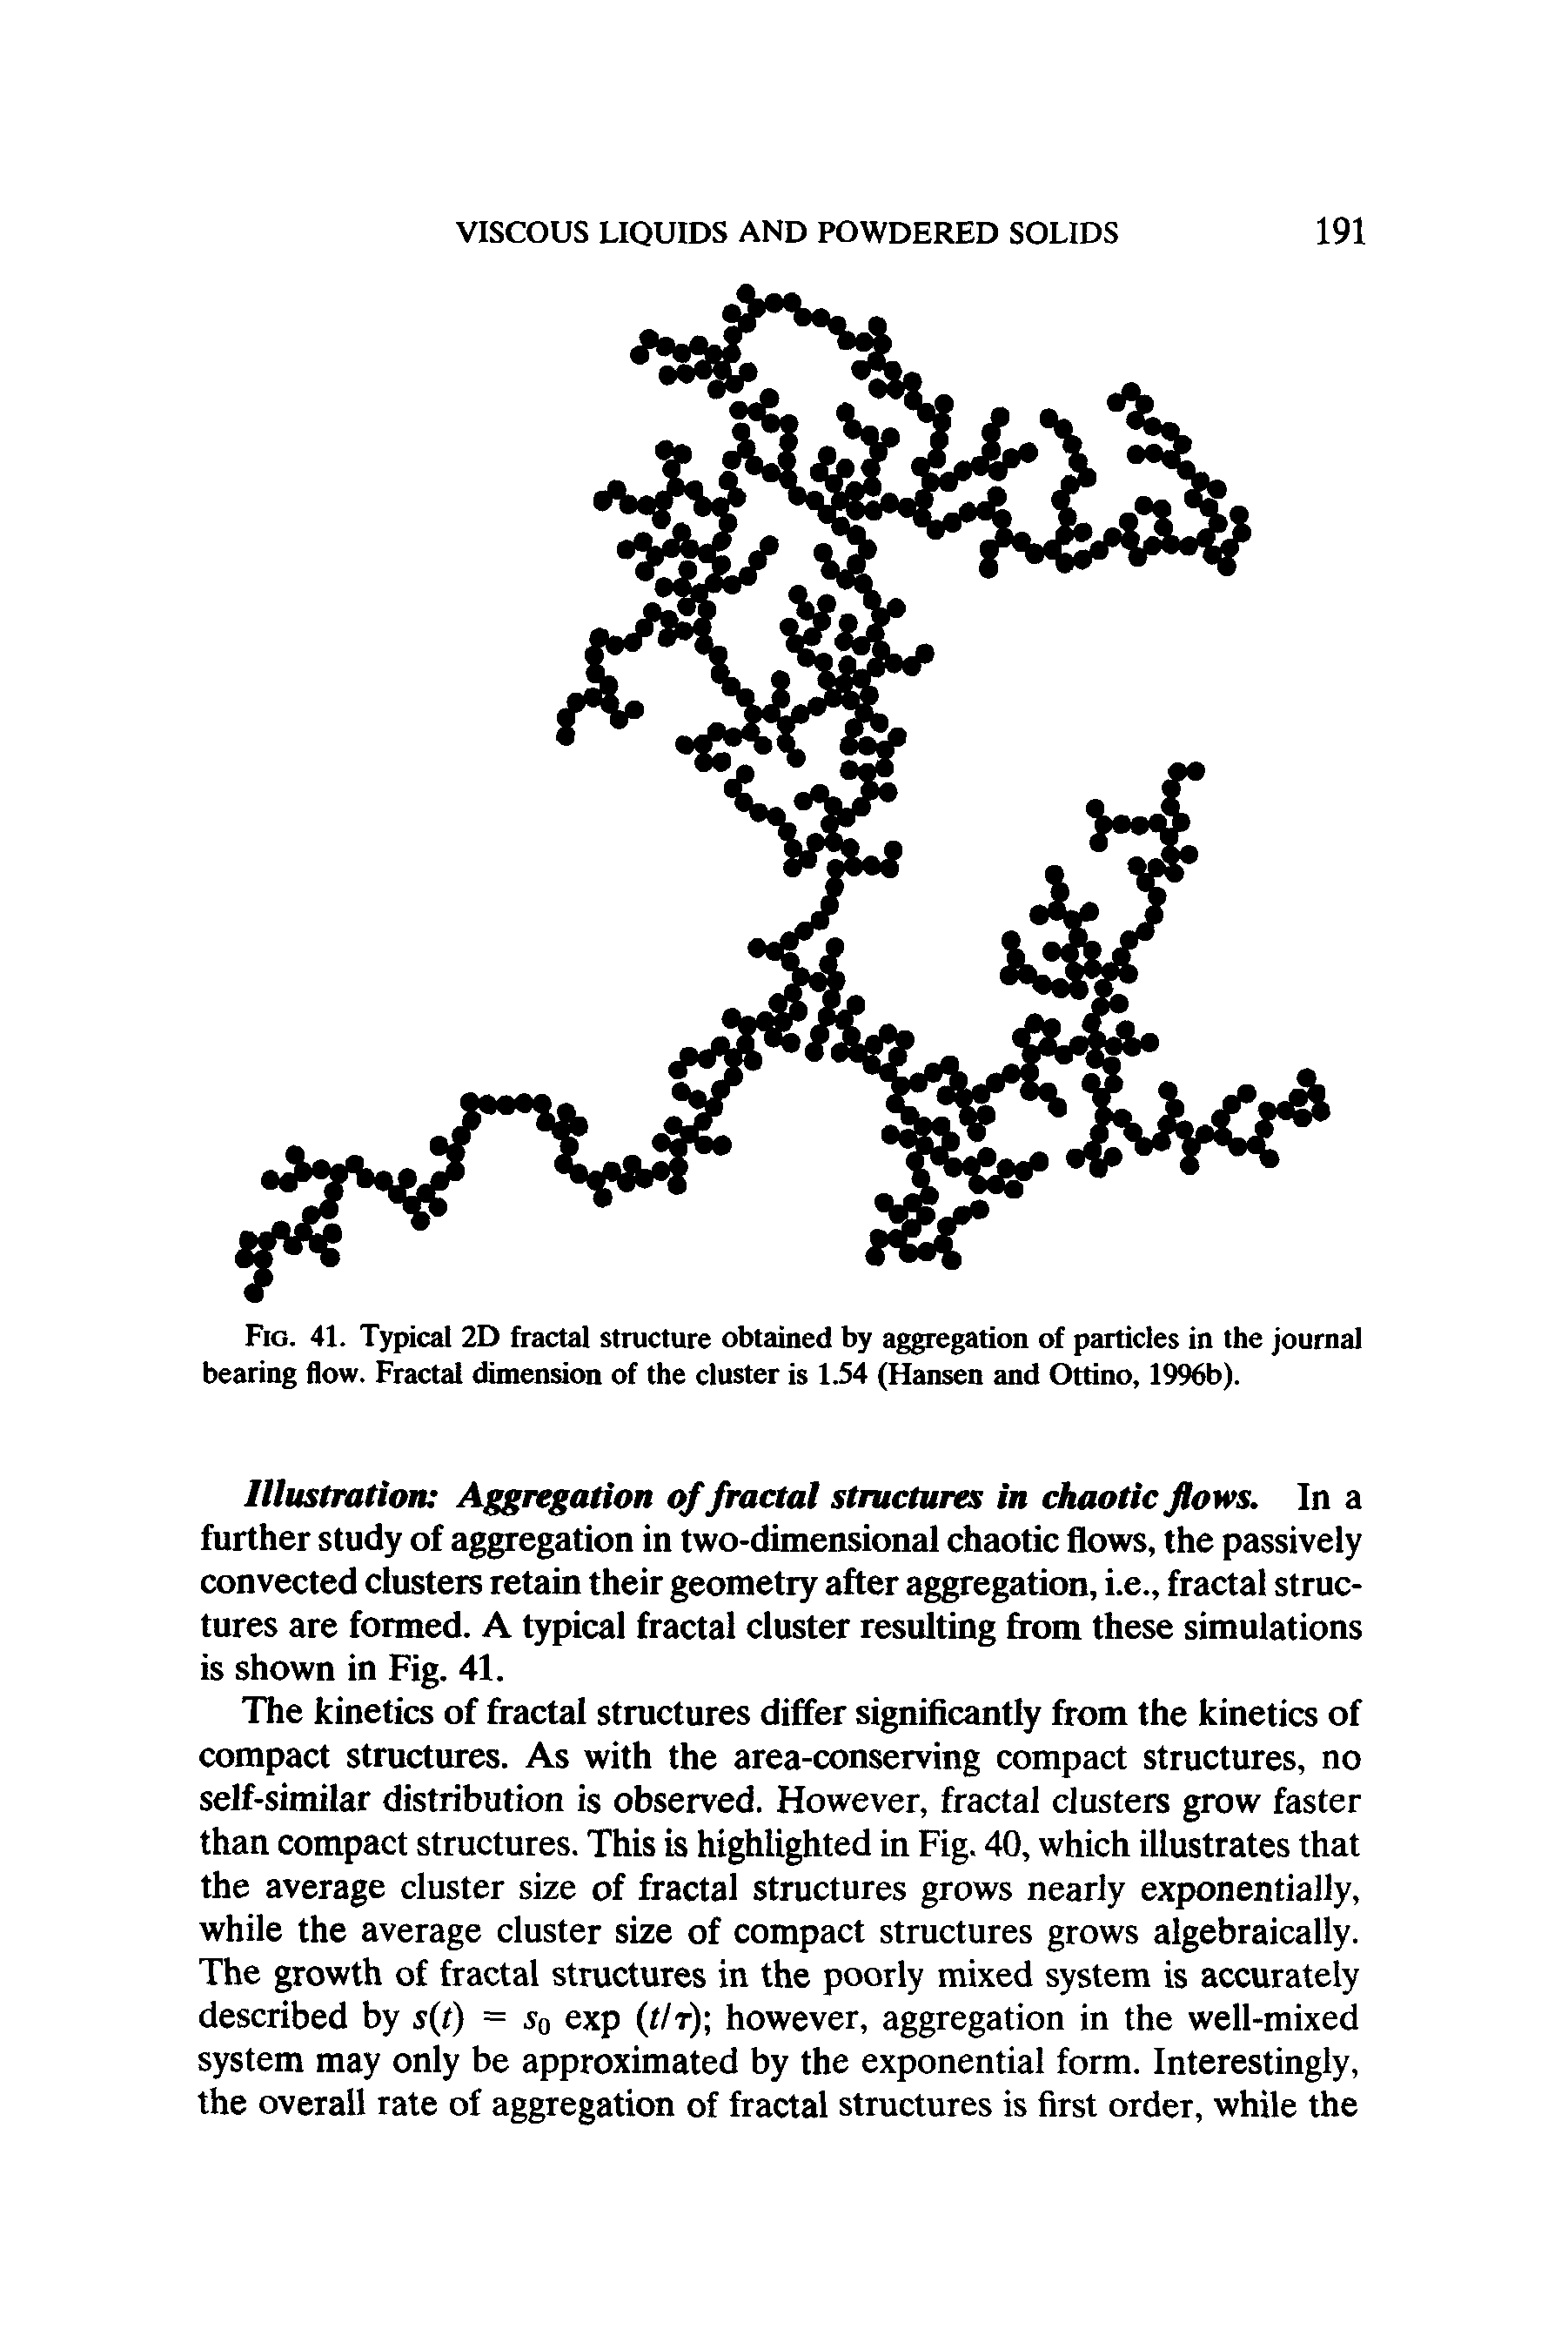 Fig. 41. Typical 2D fractal structure obtained by aggregation of particles in the journal bearing flow. Fractal dimension of the cluster is 1.54 (Hansen and Ottino, 1996b).